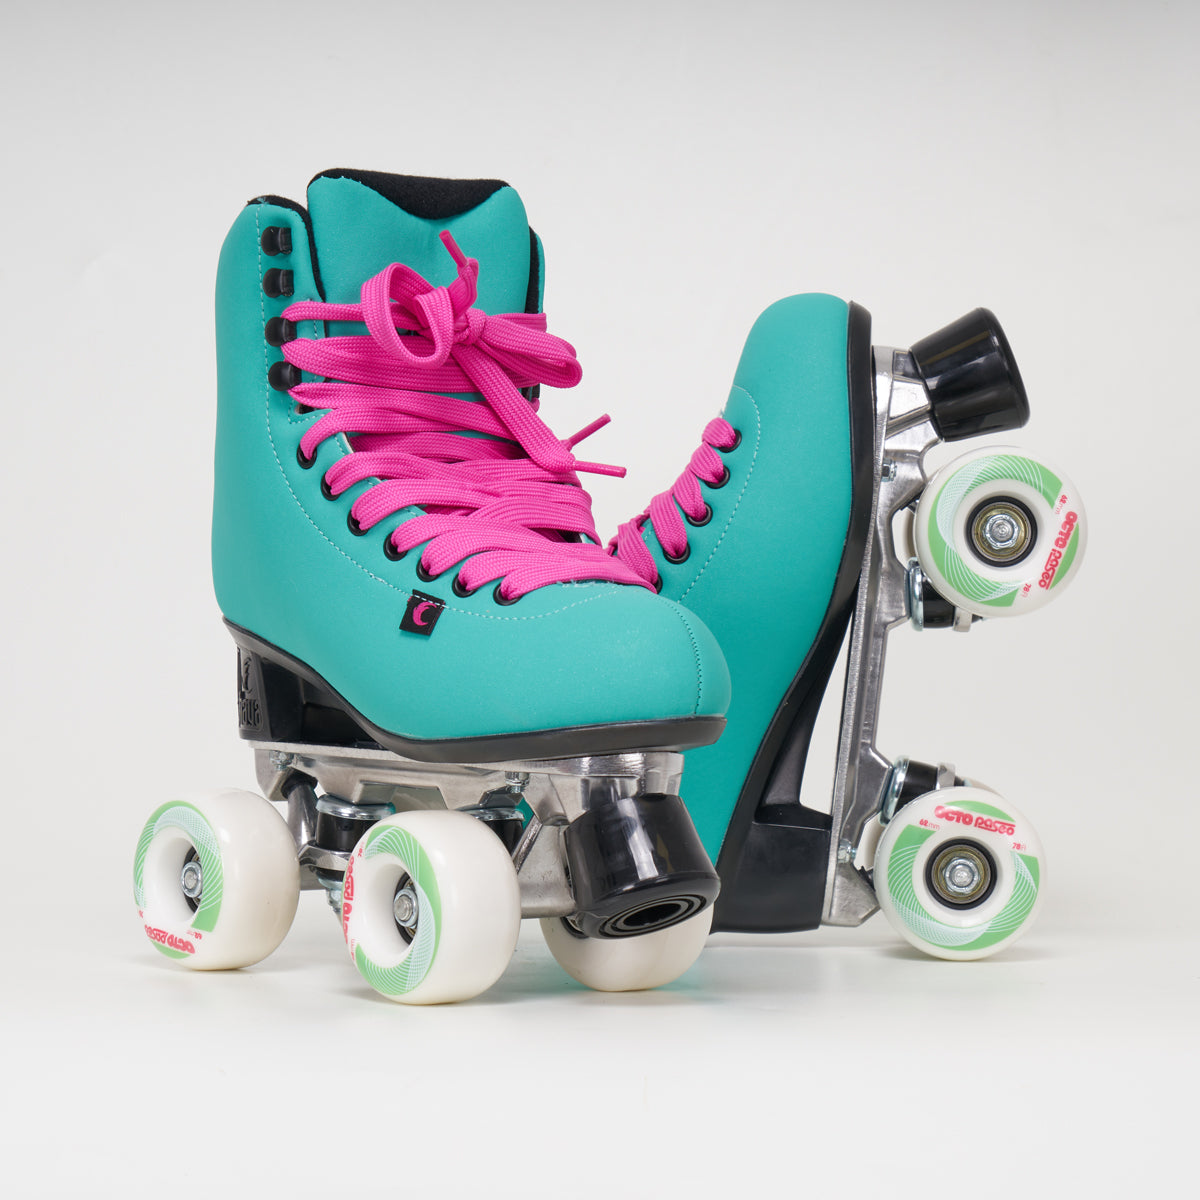 Chaya Melrose Deluxe Rollerskates - Turquoise